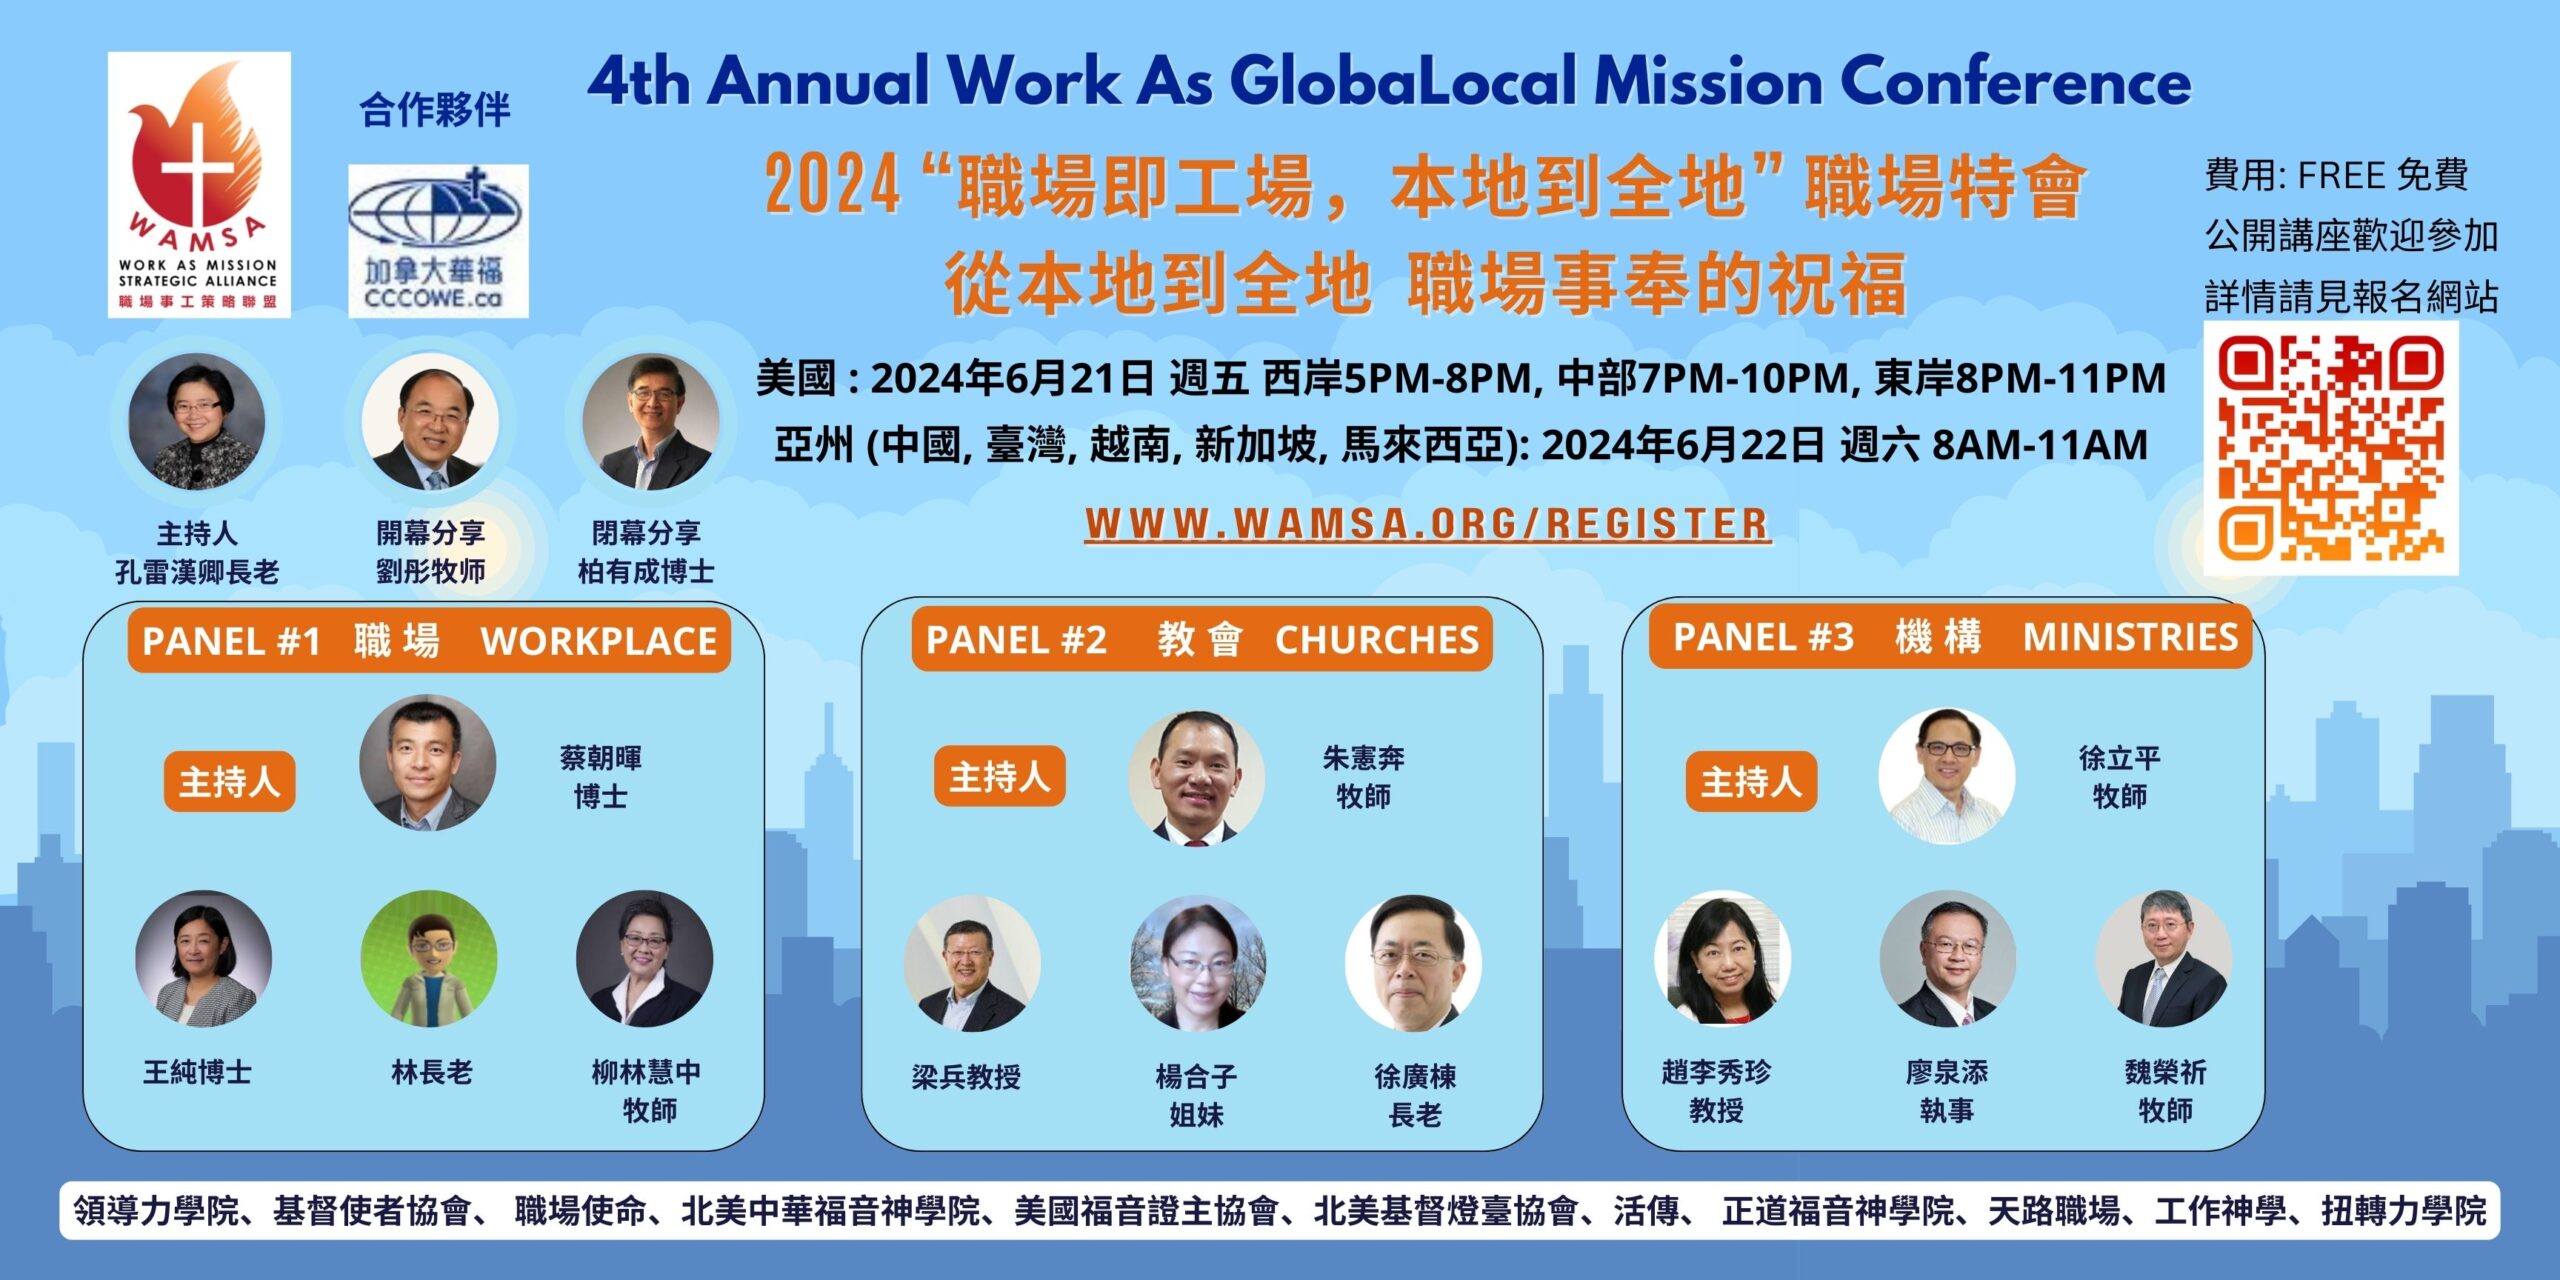 Version-2-4th-Annual-GlobaLocal-Mission-WGLM-Chinese-Conference-1-scaled.jpg